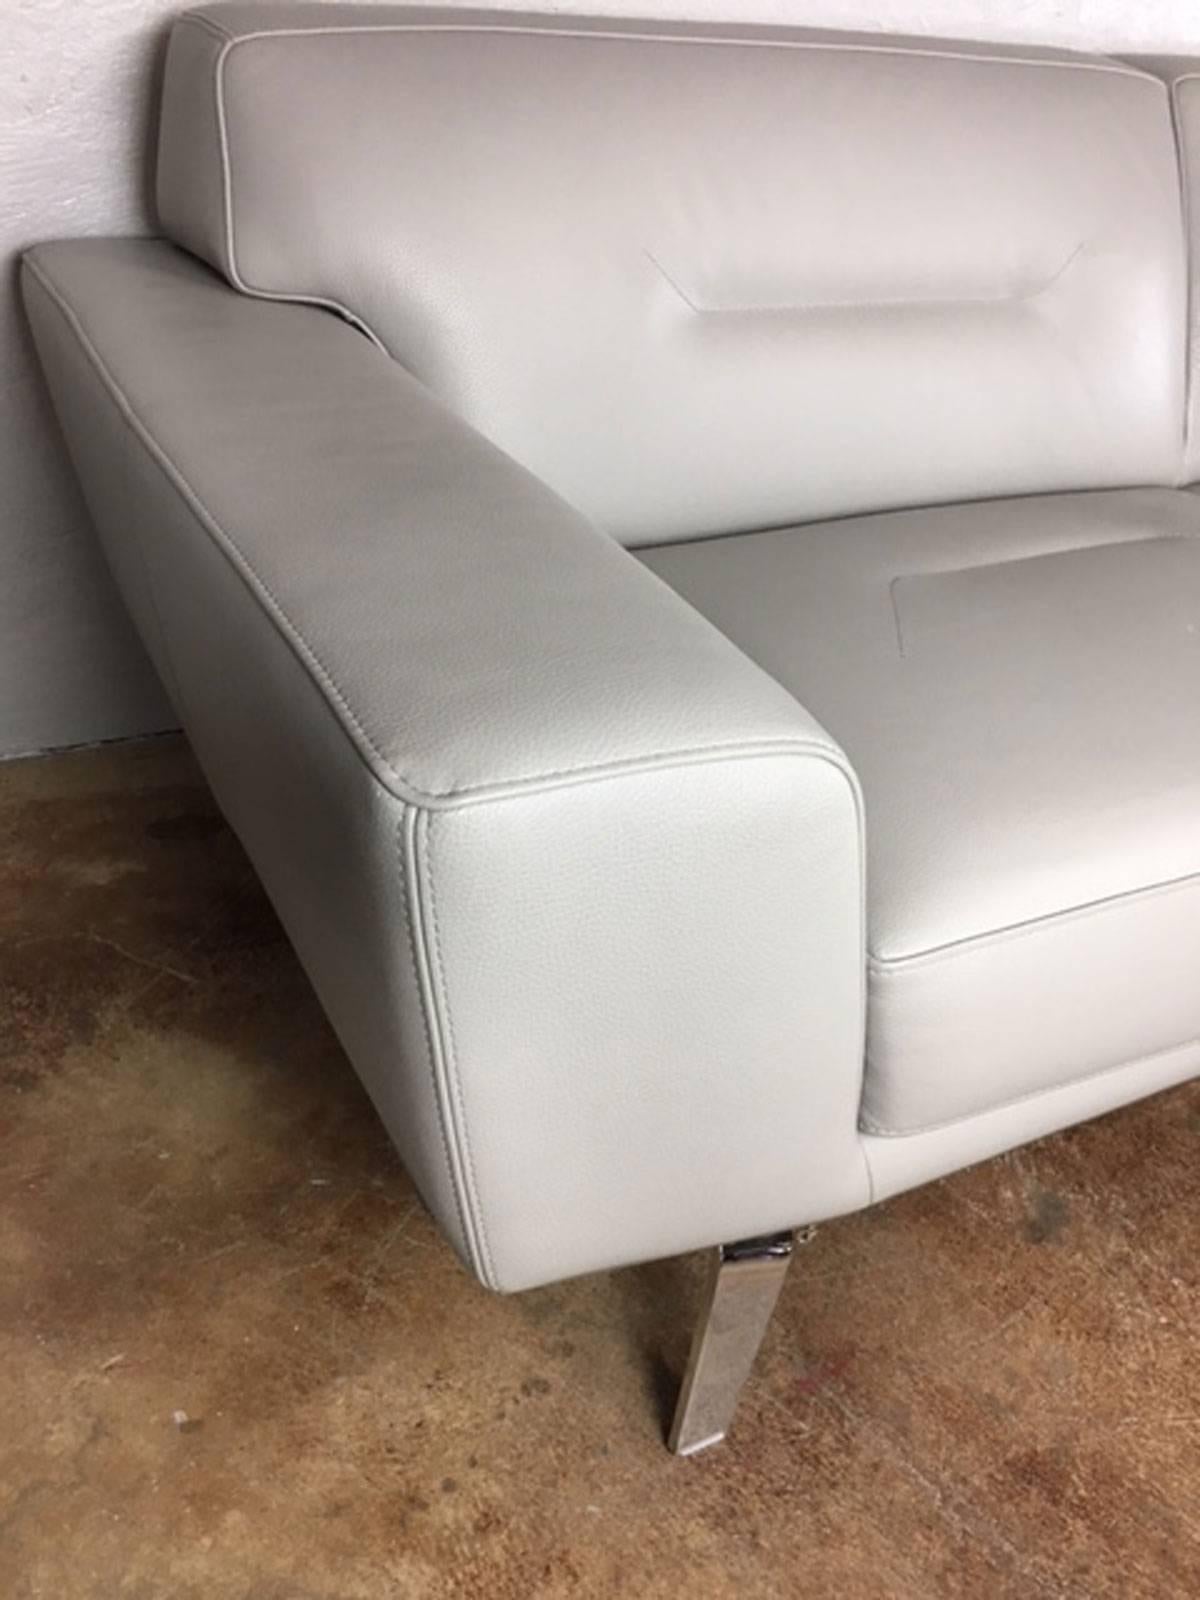 Superb Roche Bobois gray leather sofa. No rips, tears, holes, or unusual wear. Sleek. Modern. Seat height is 15